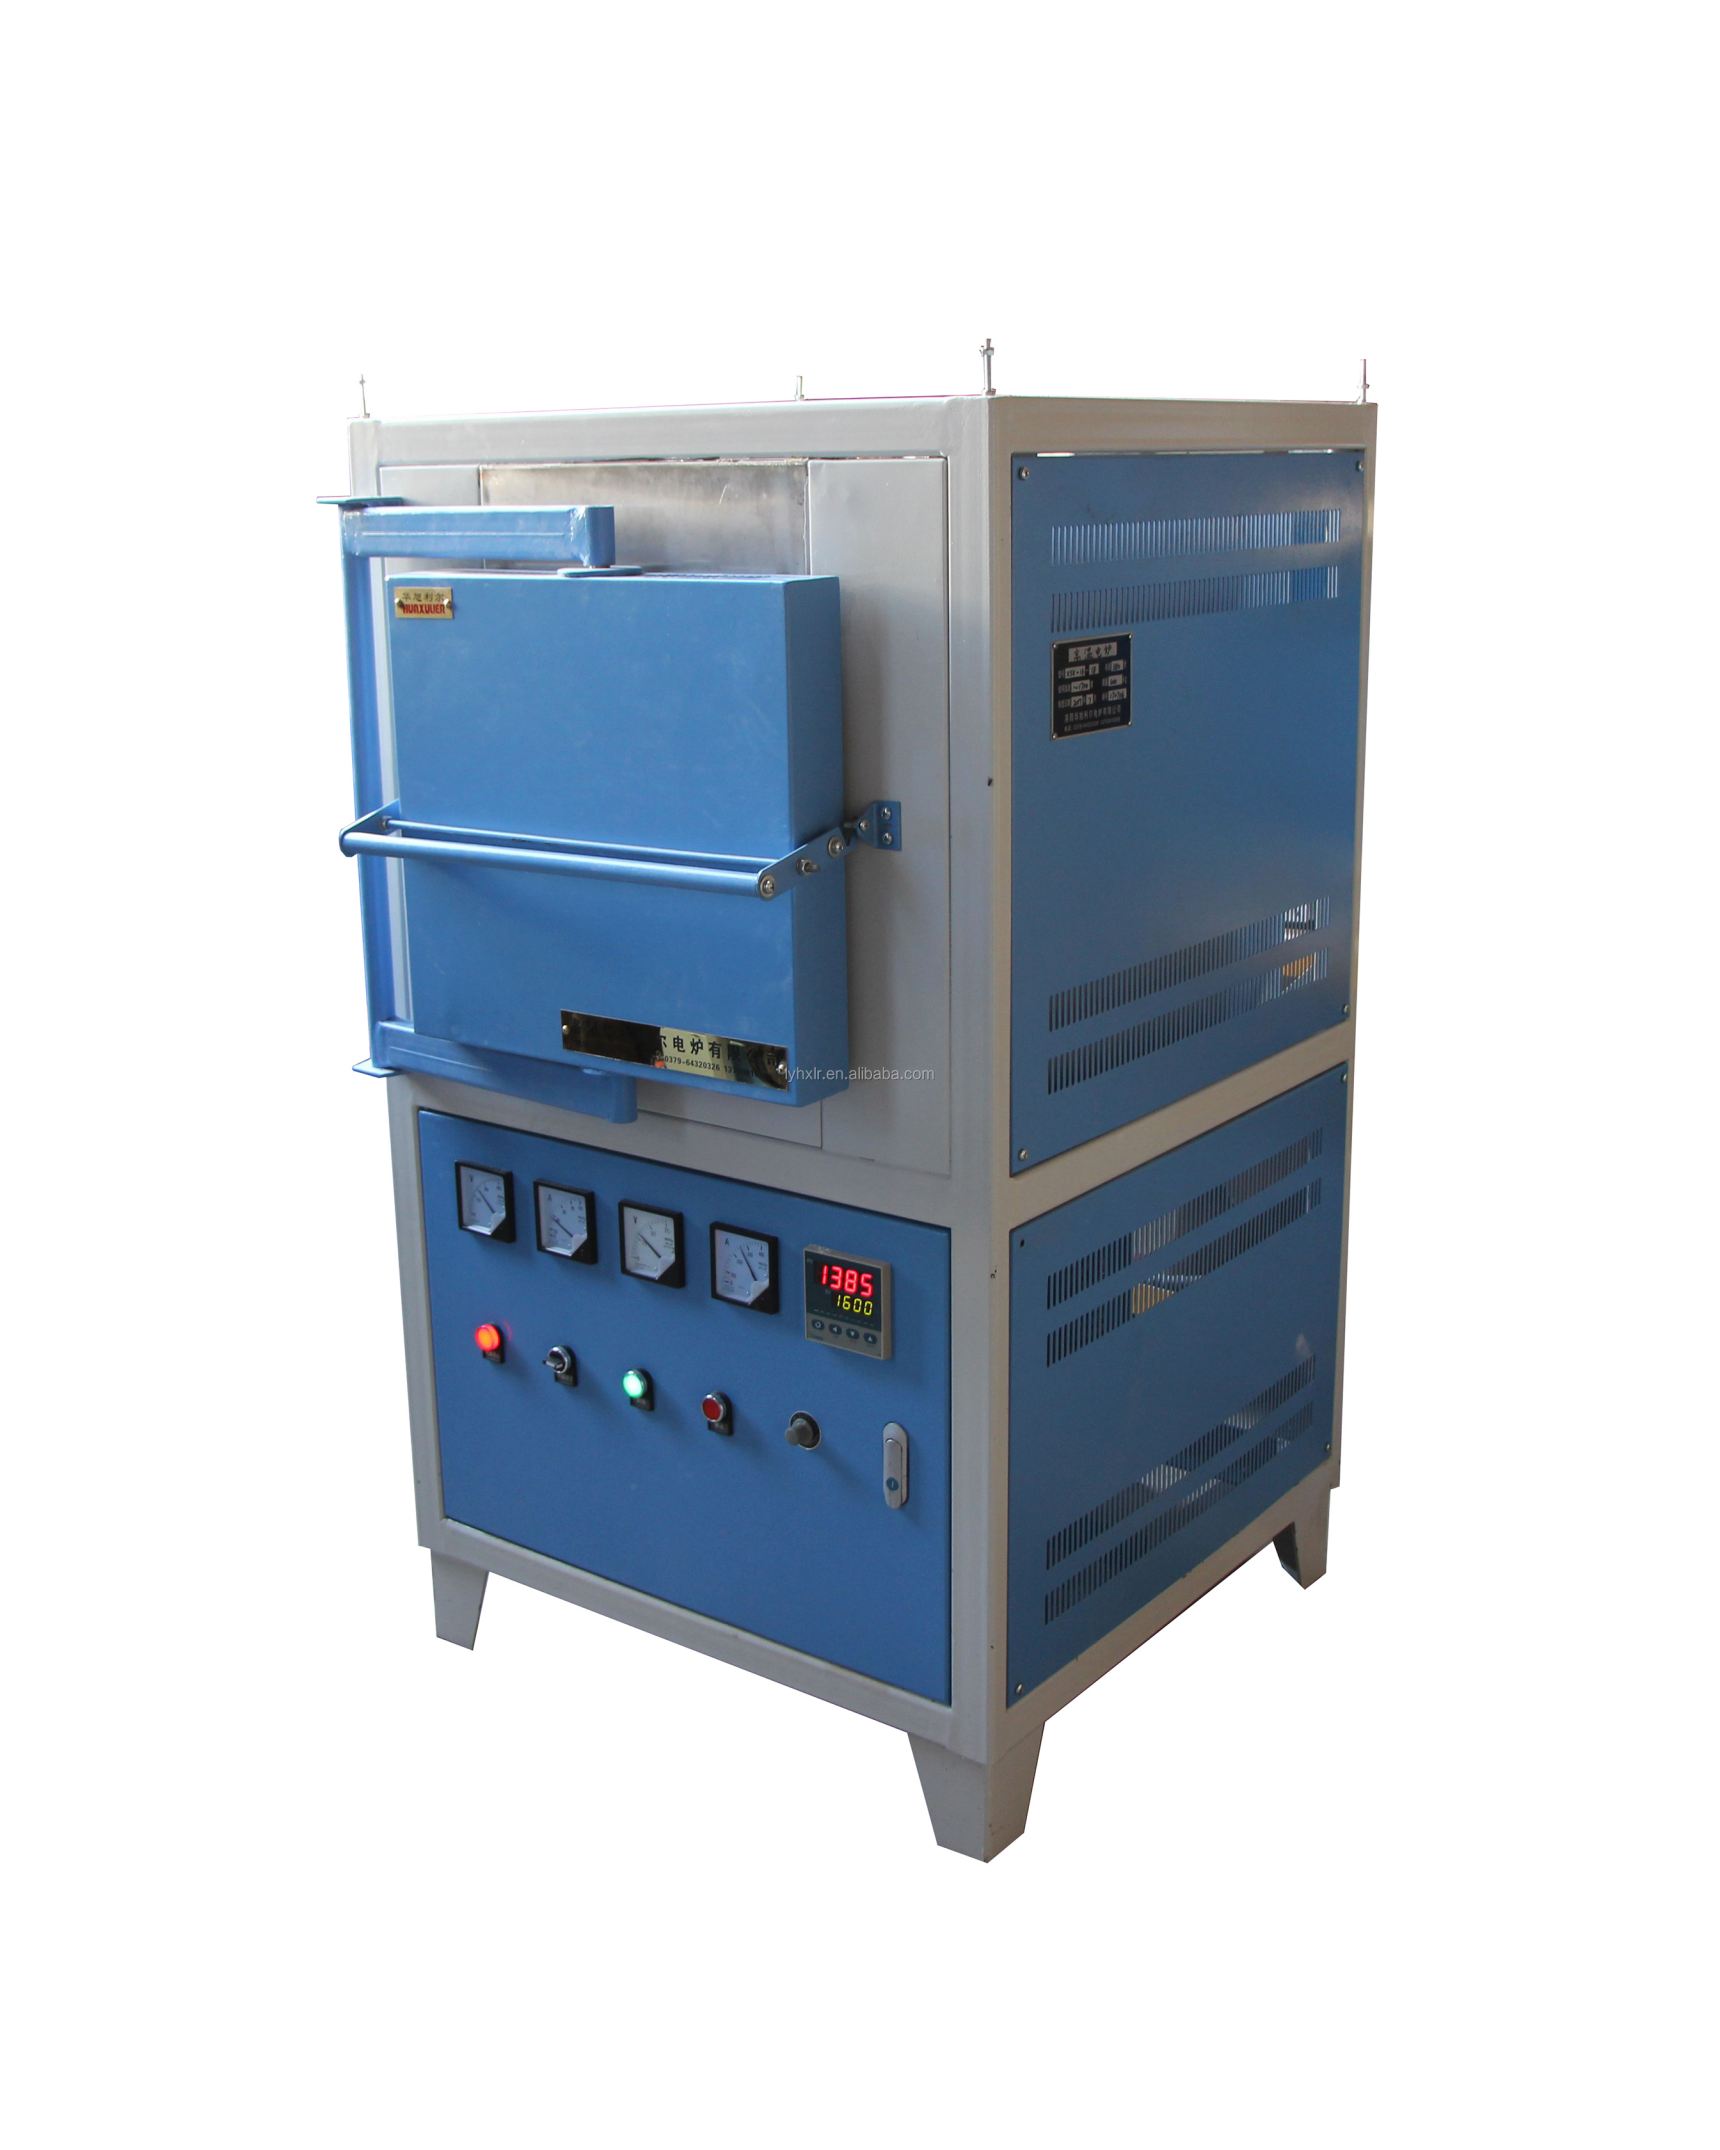 2020 new product 1600 degree High temperature furnace muffle furnace